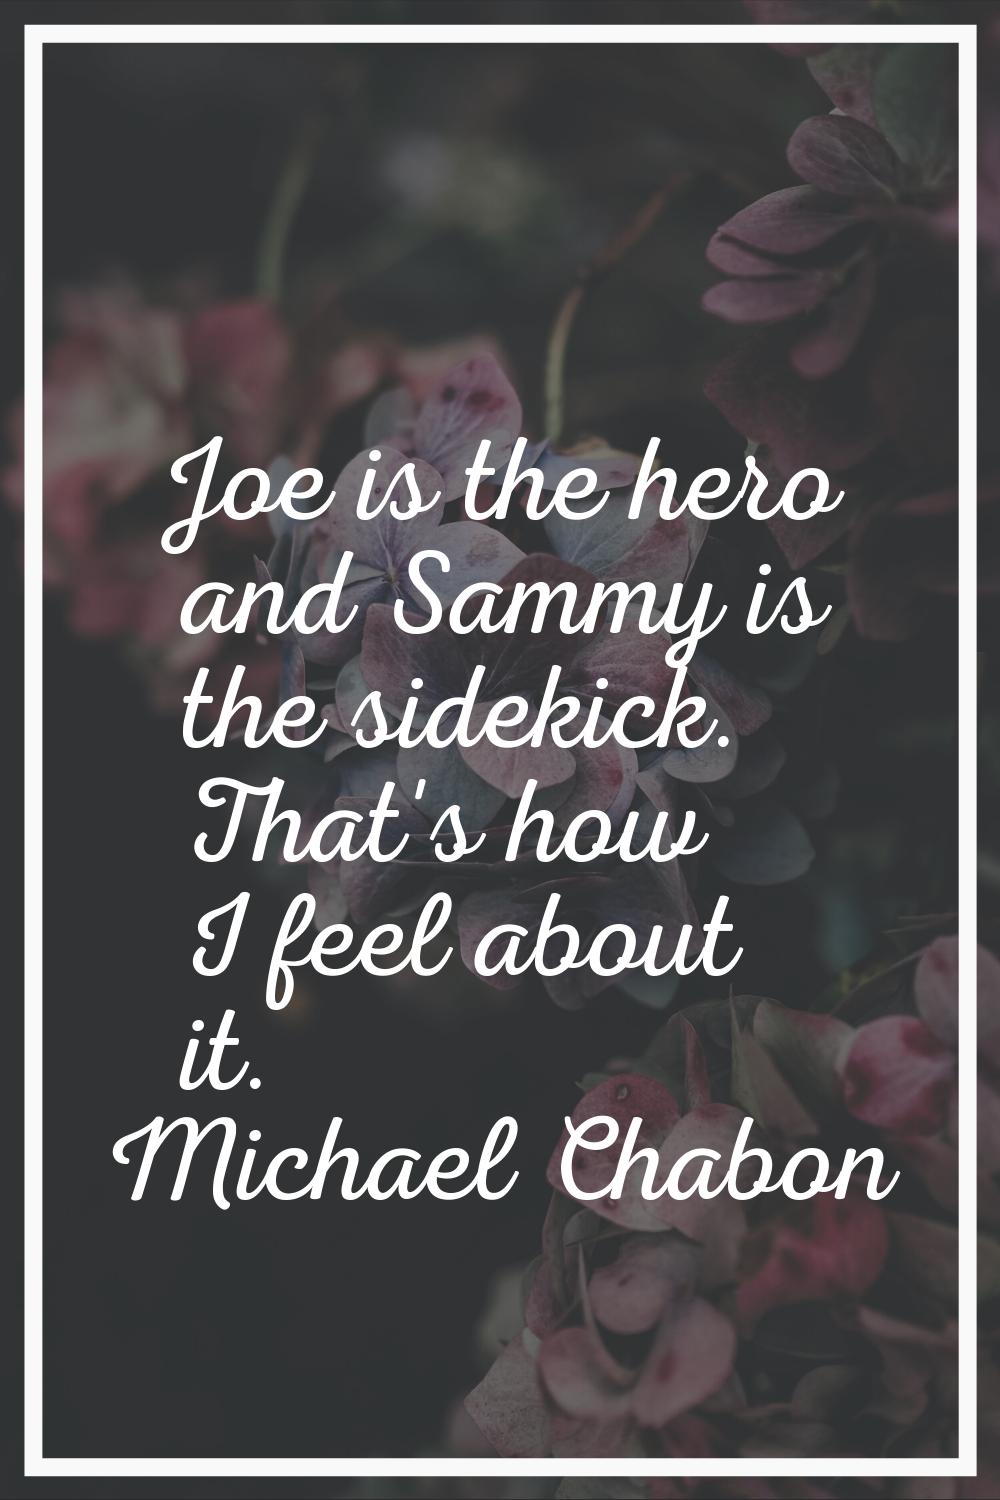 Joe is the hero and Sammy is the sidekick. That's how I feel about it.